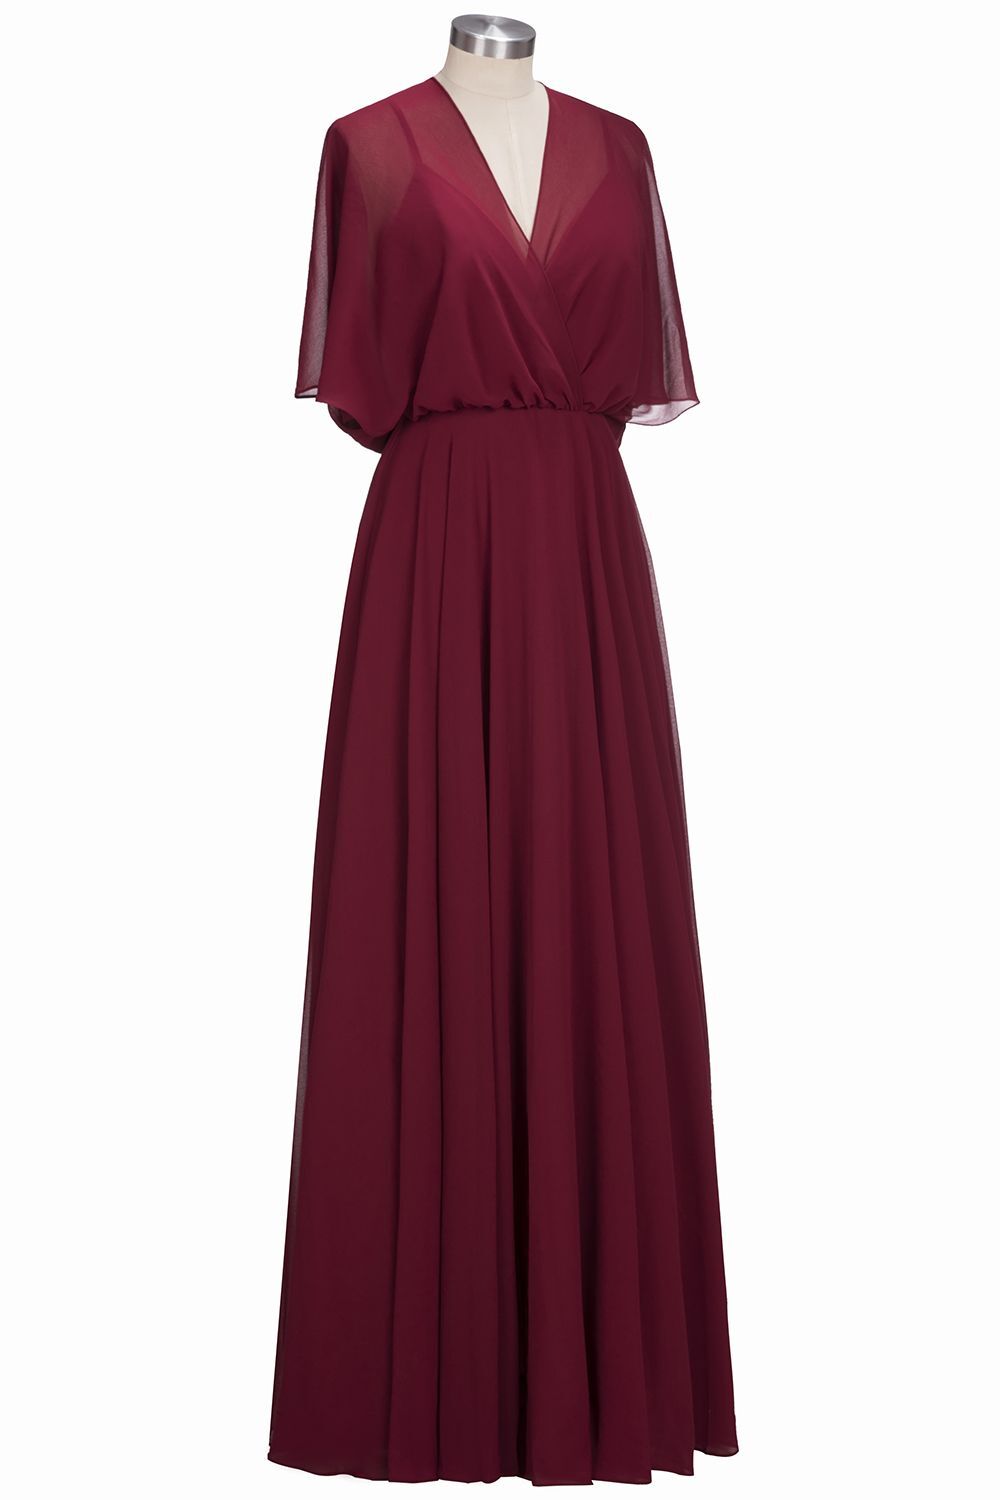 Casual A-line Burgundy Flare Sleeves Long Bridesmaid Dress